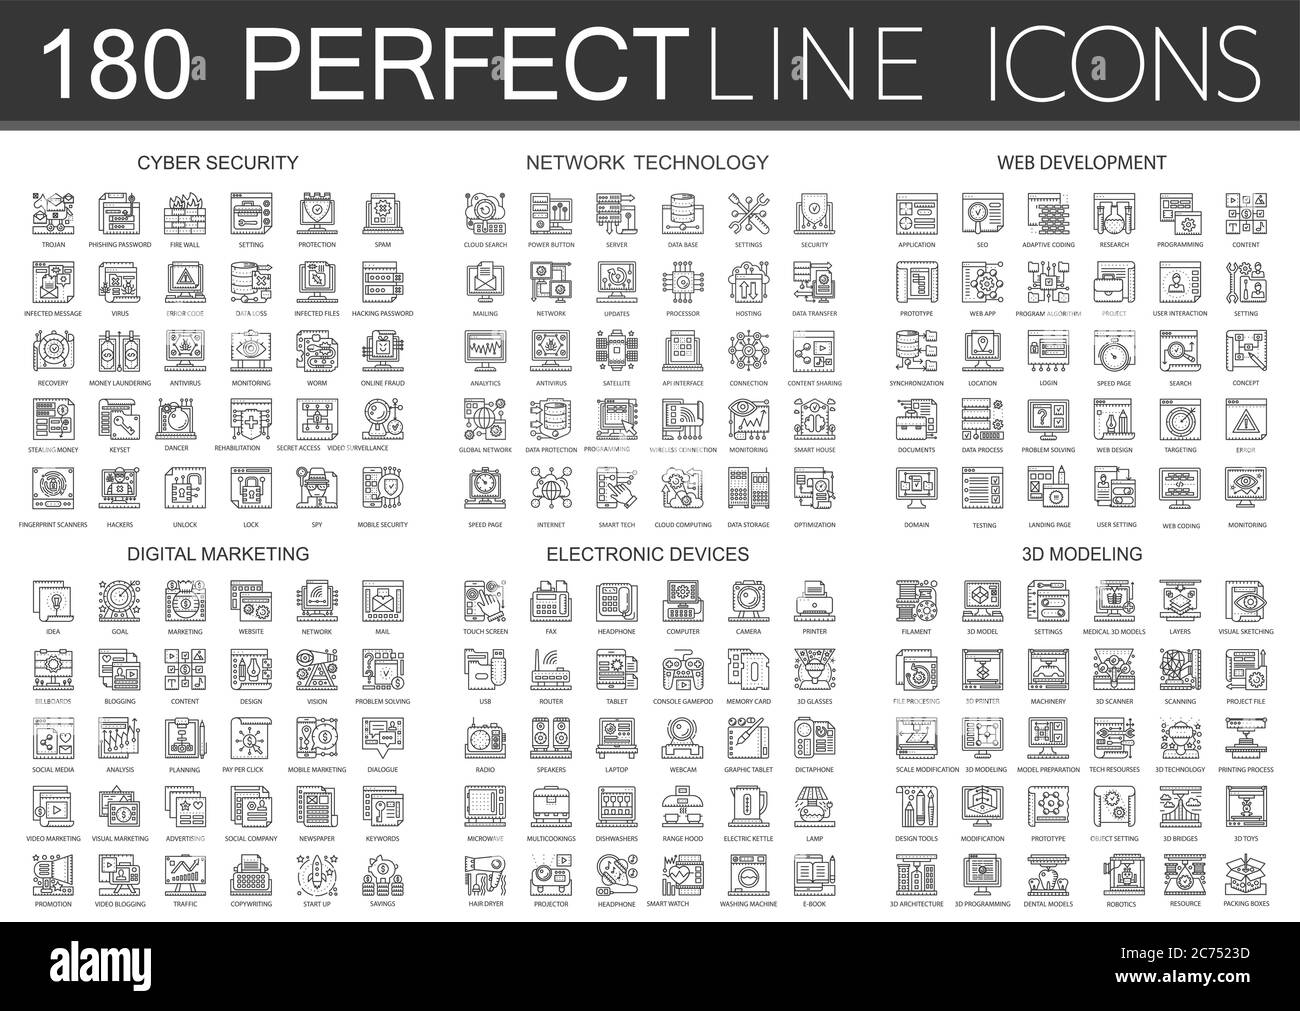 180 outline mini concept infographic symbol icons of cyber security, network technology, web development, digital marketing, electronic devices, 3d modeling isolated. Stock Vector